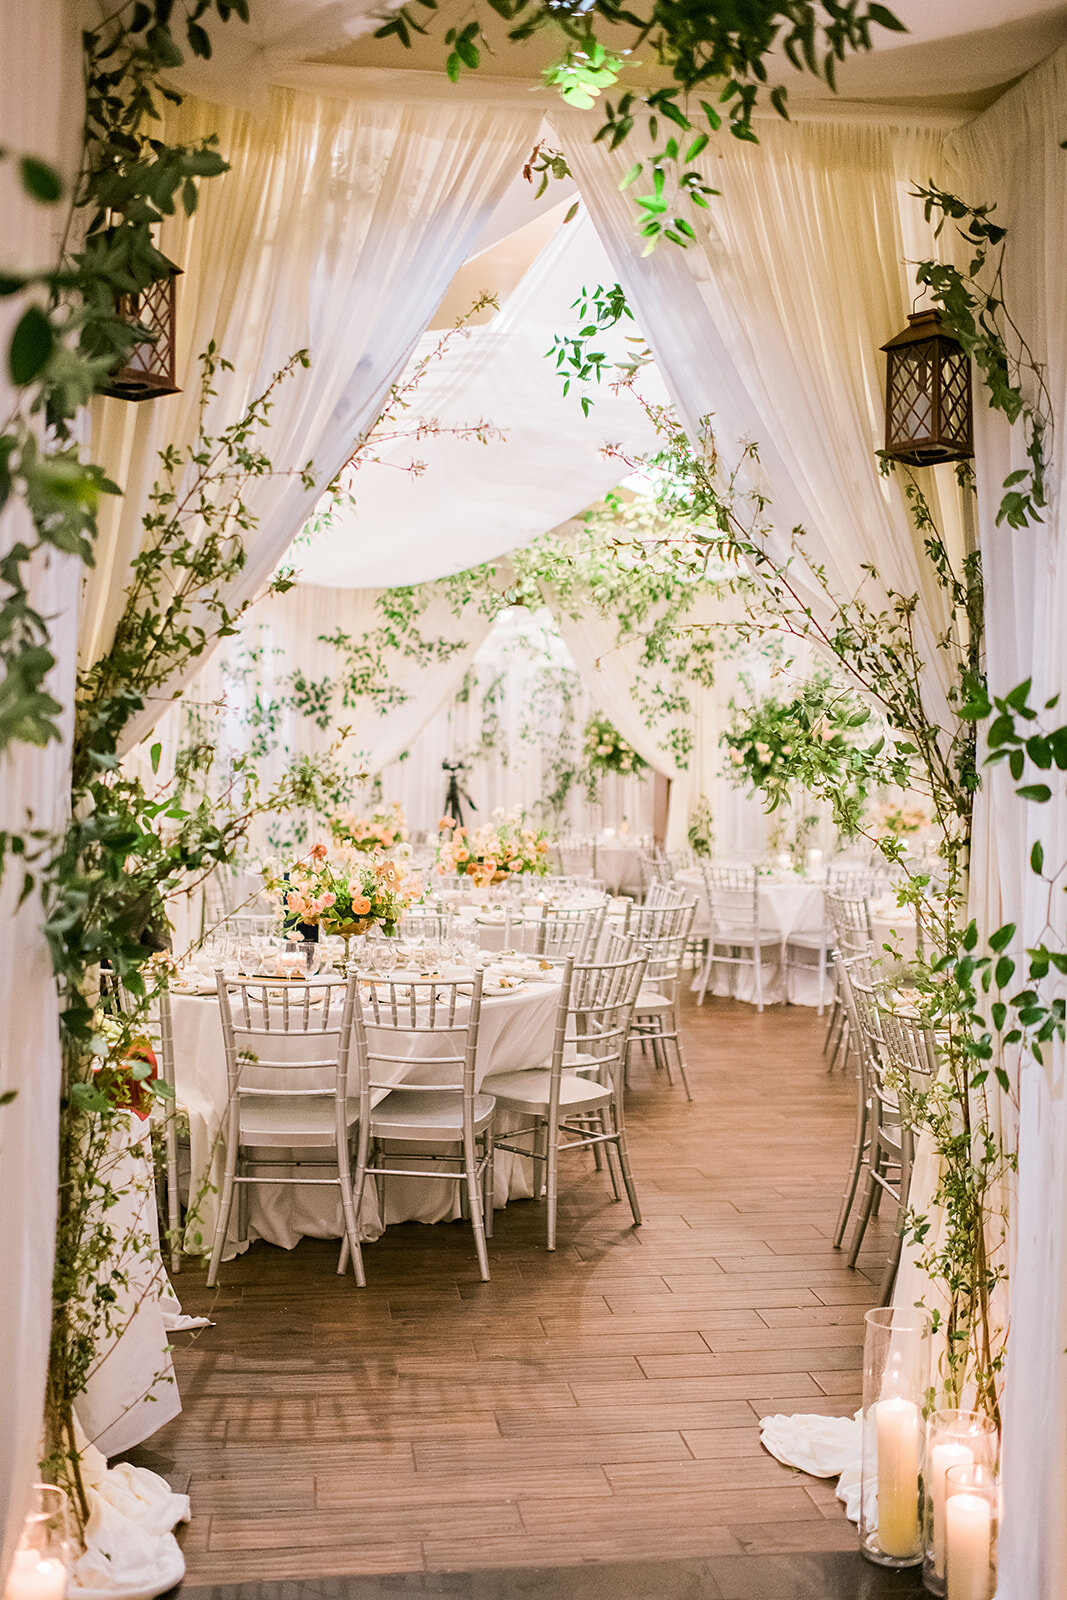 entrance-garden-style-intimate-wedding-by-blush-floral-co-houston-texas-photo-by-kaiti-moyers-photography